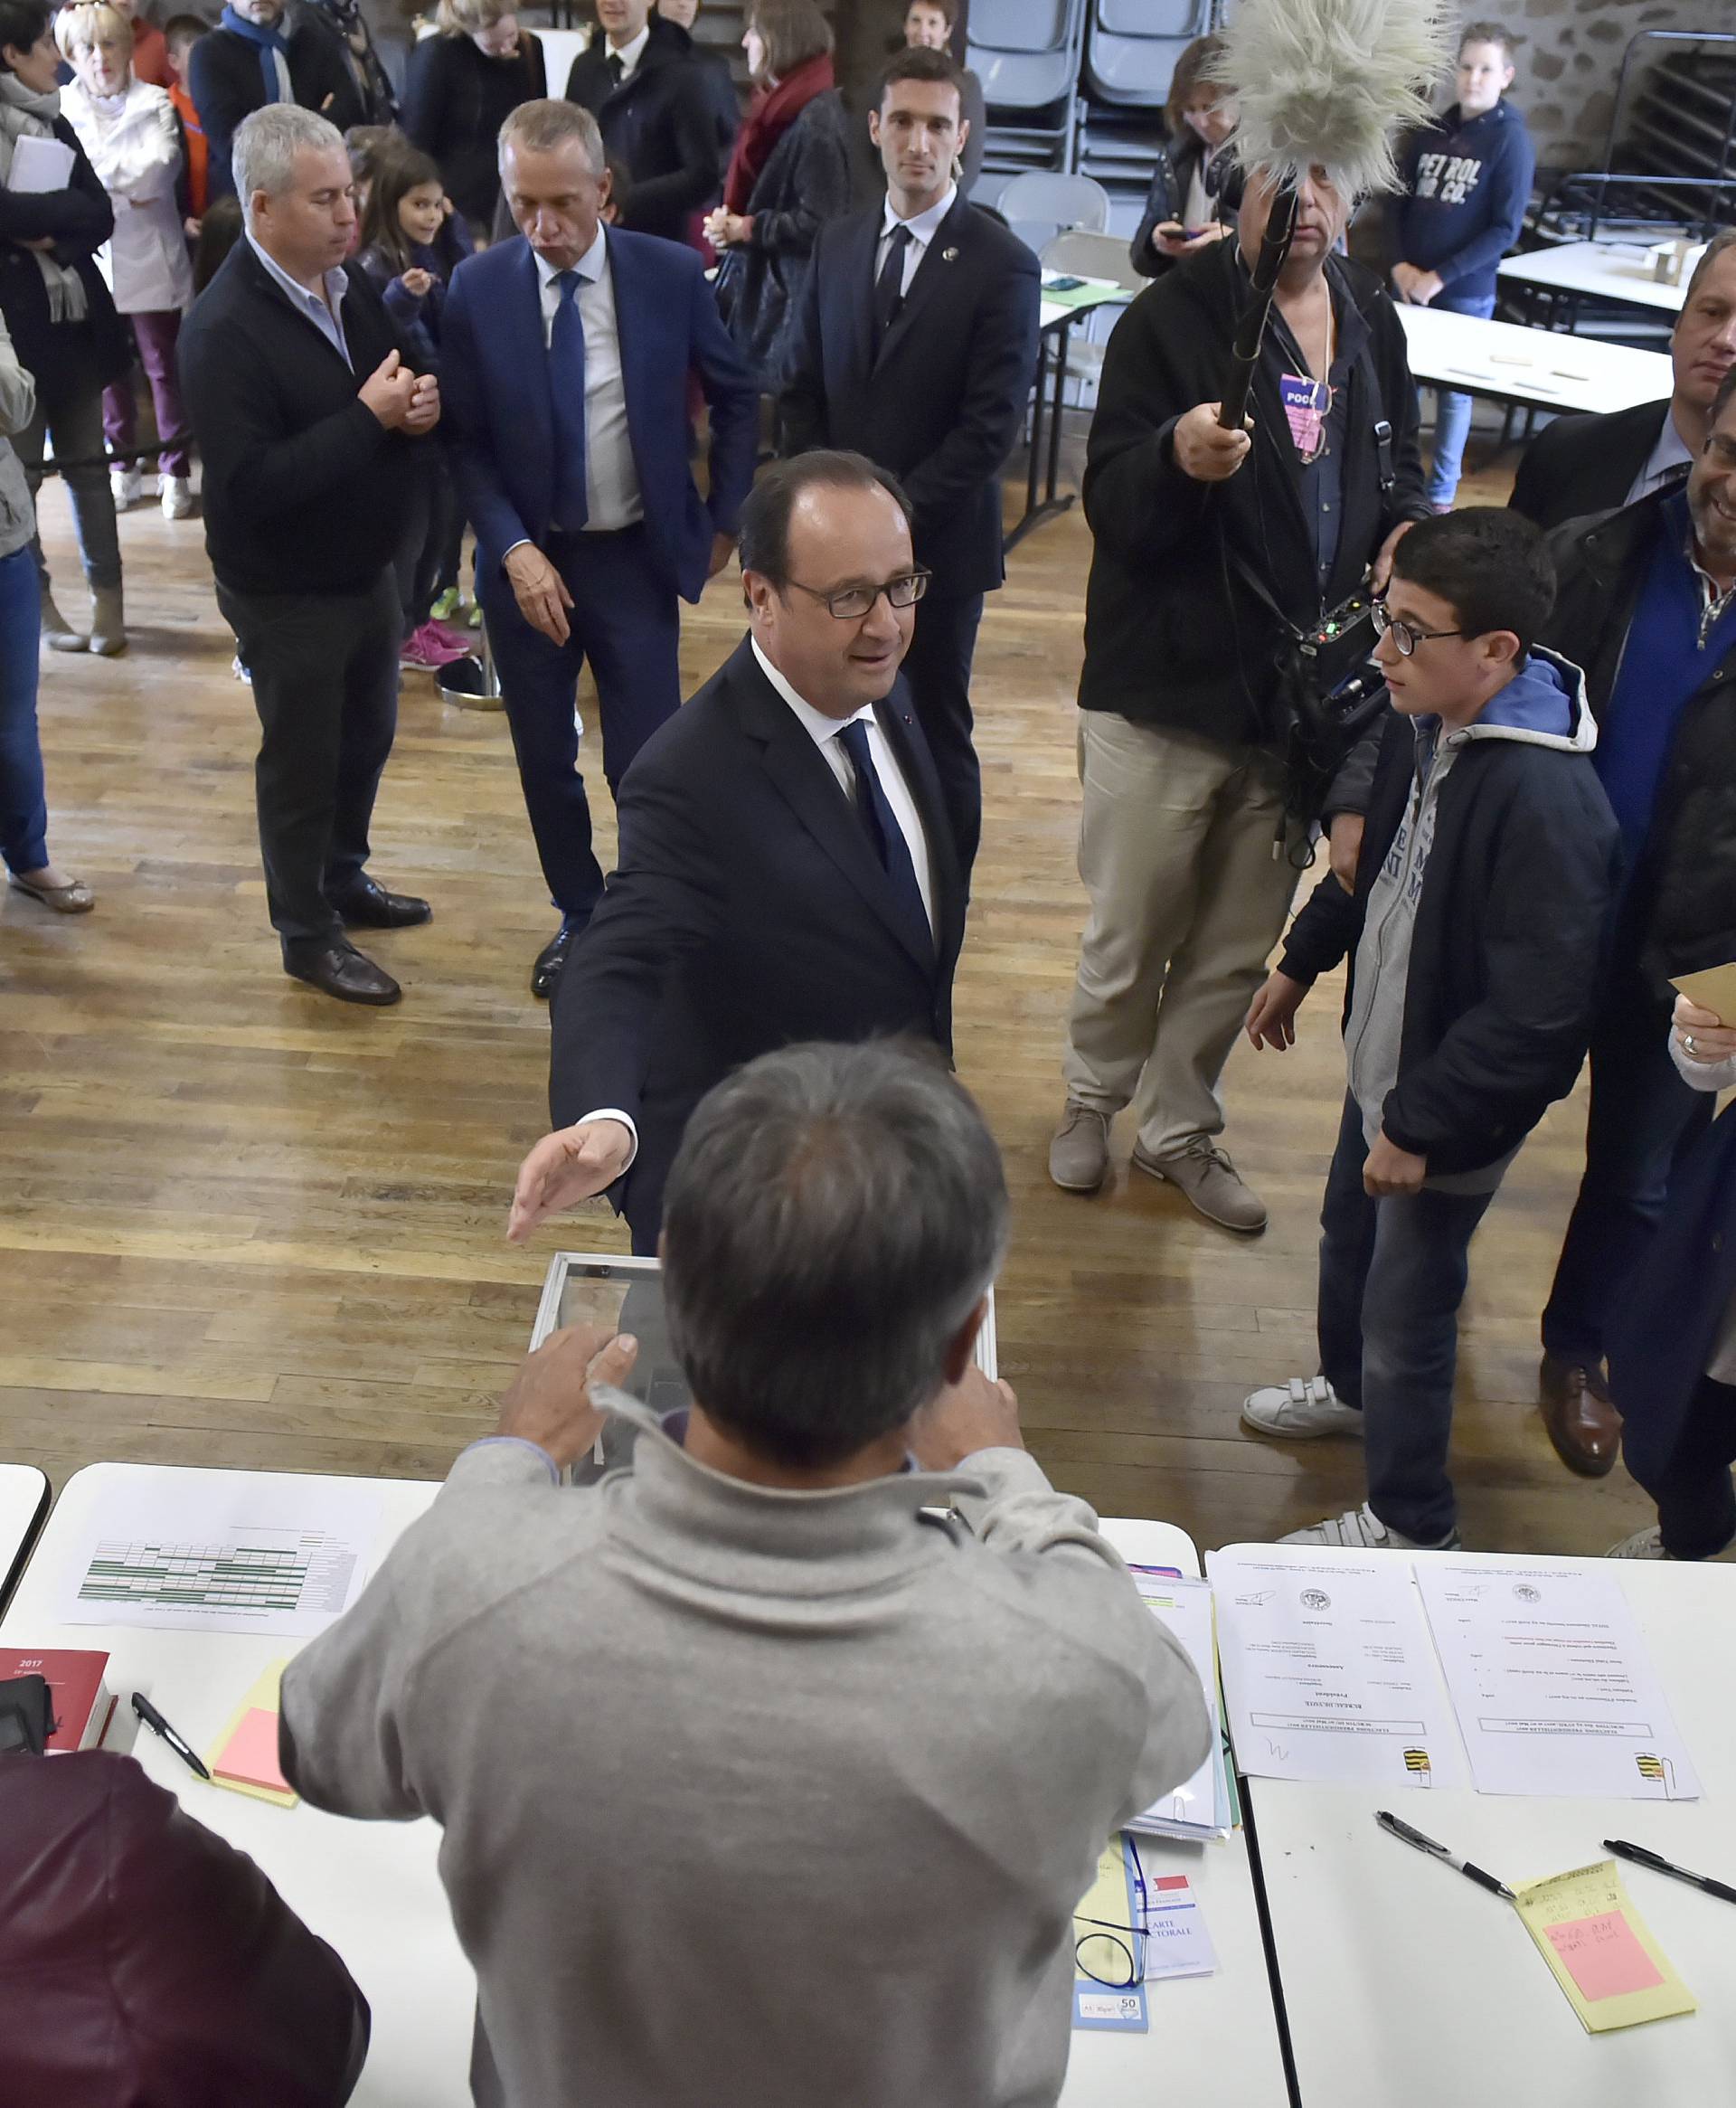 French President Francois Hollande talks with people as he visits a polling station in the village of Saint Mexant during the second round of the 2017 French presidential election